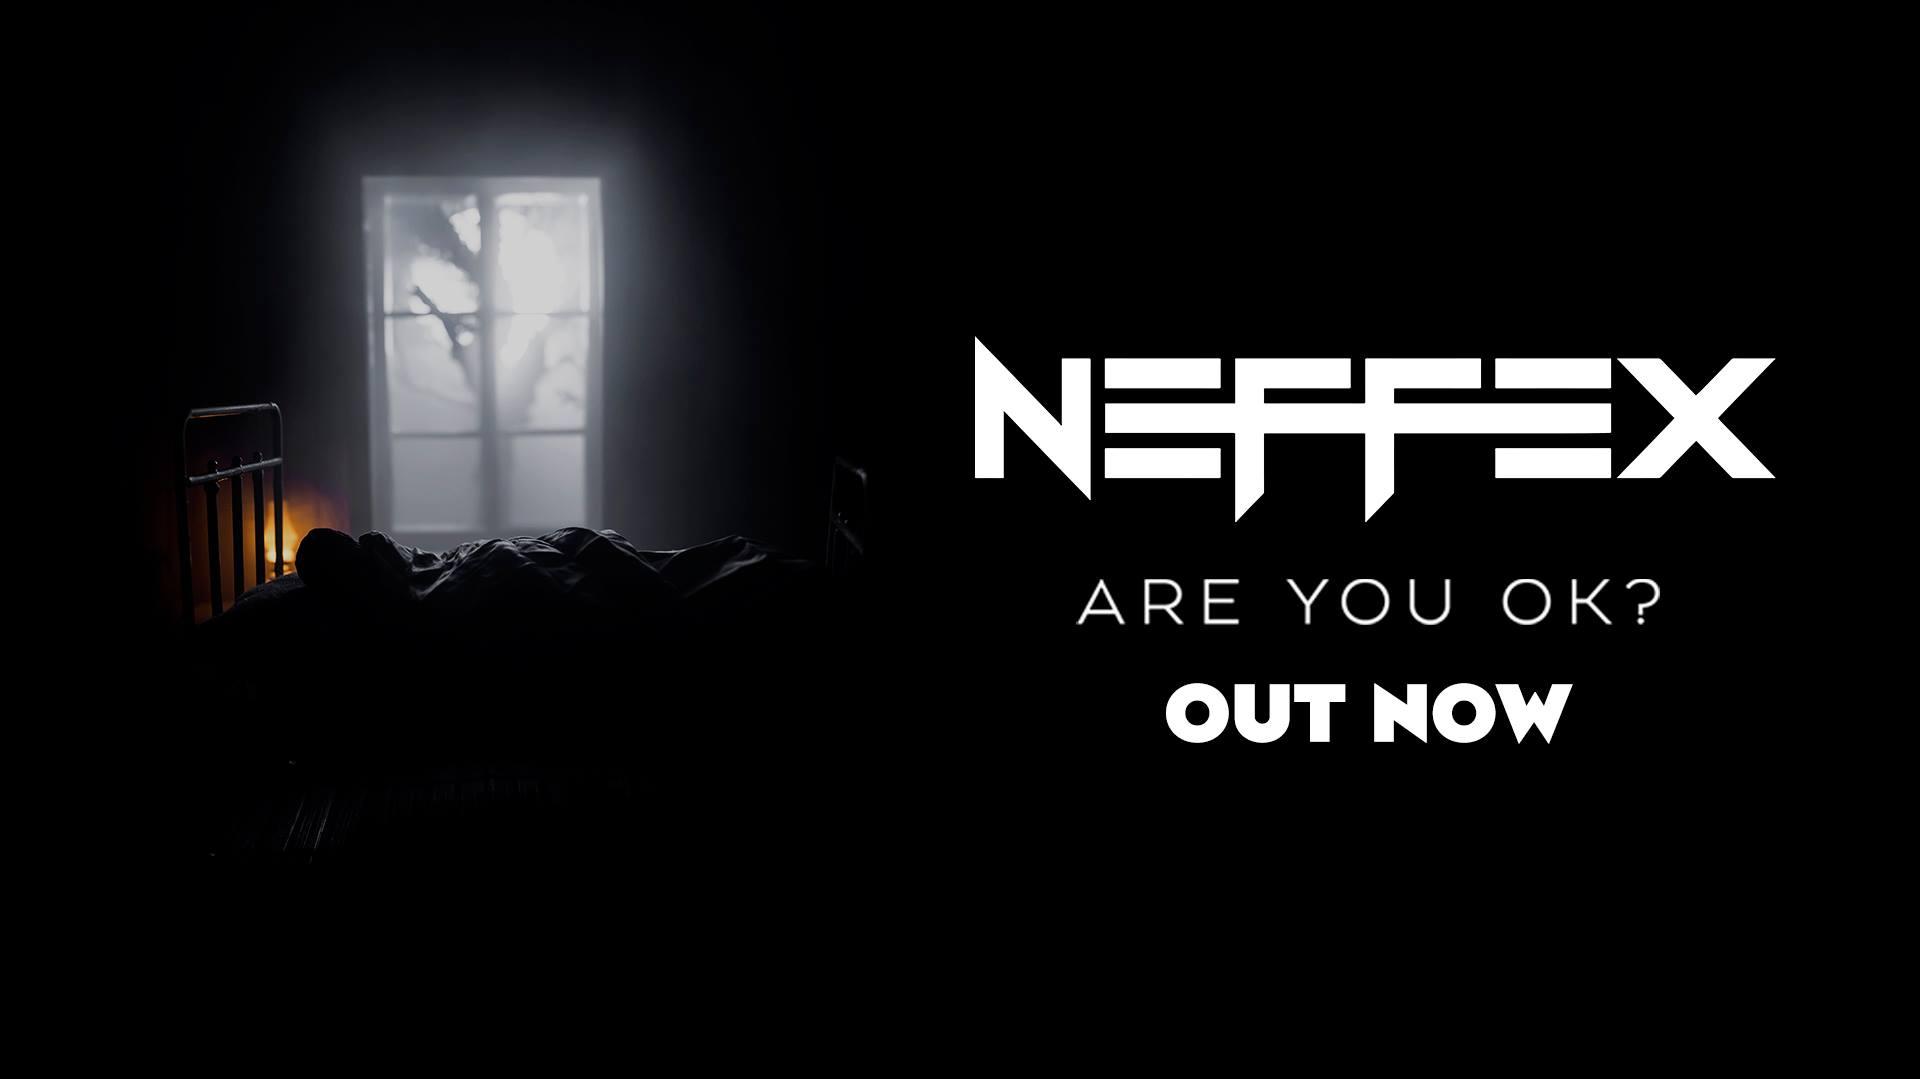 Neffex Updated Their Cover Photo